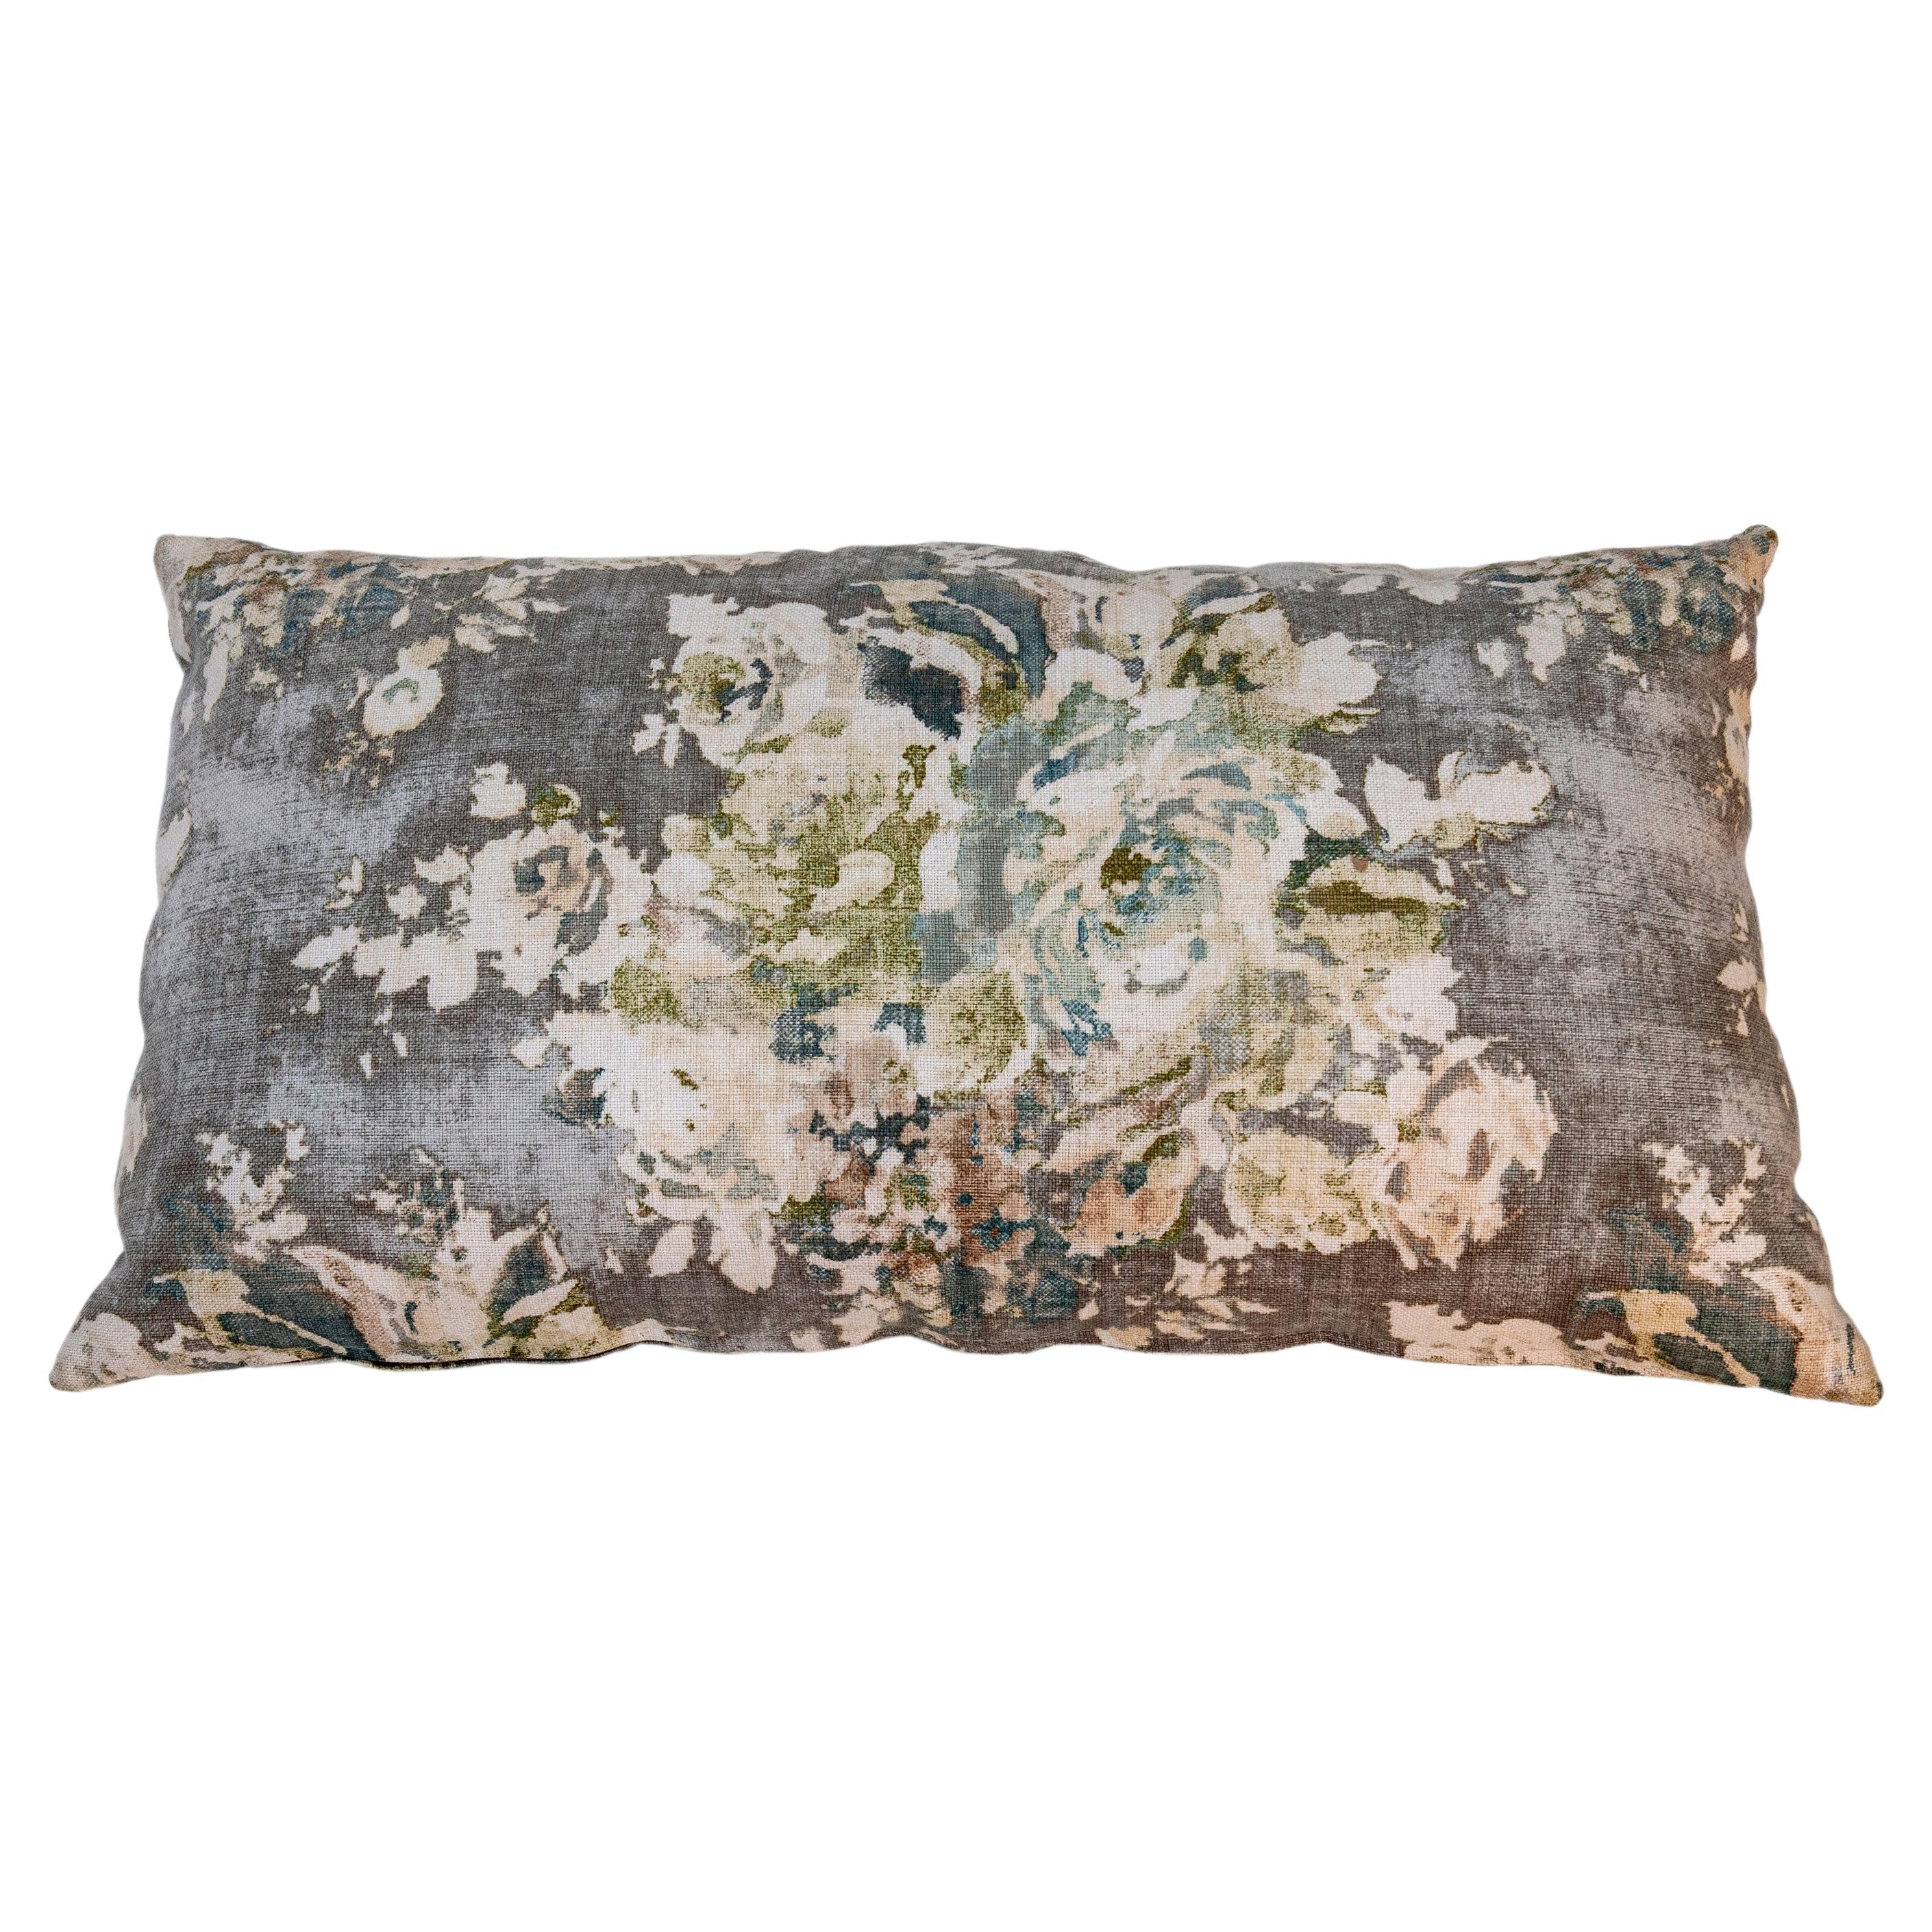 Rough weave linen with abstract pattern of roses leaves on a charcoal background. This stunning large-scale pattern has the look of a watercolor painting.
Fully wrapped pattern featured on both sides with zipper closure.
Feather & down fill insert